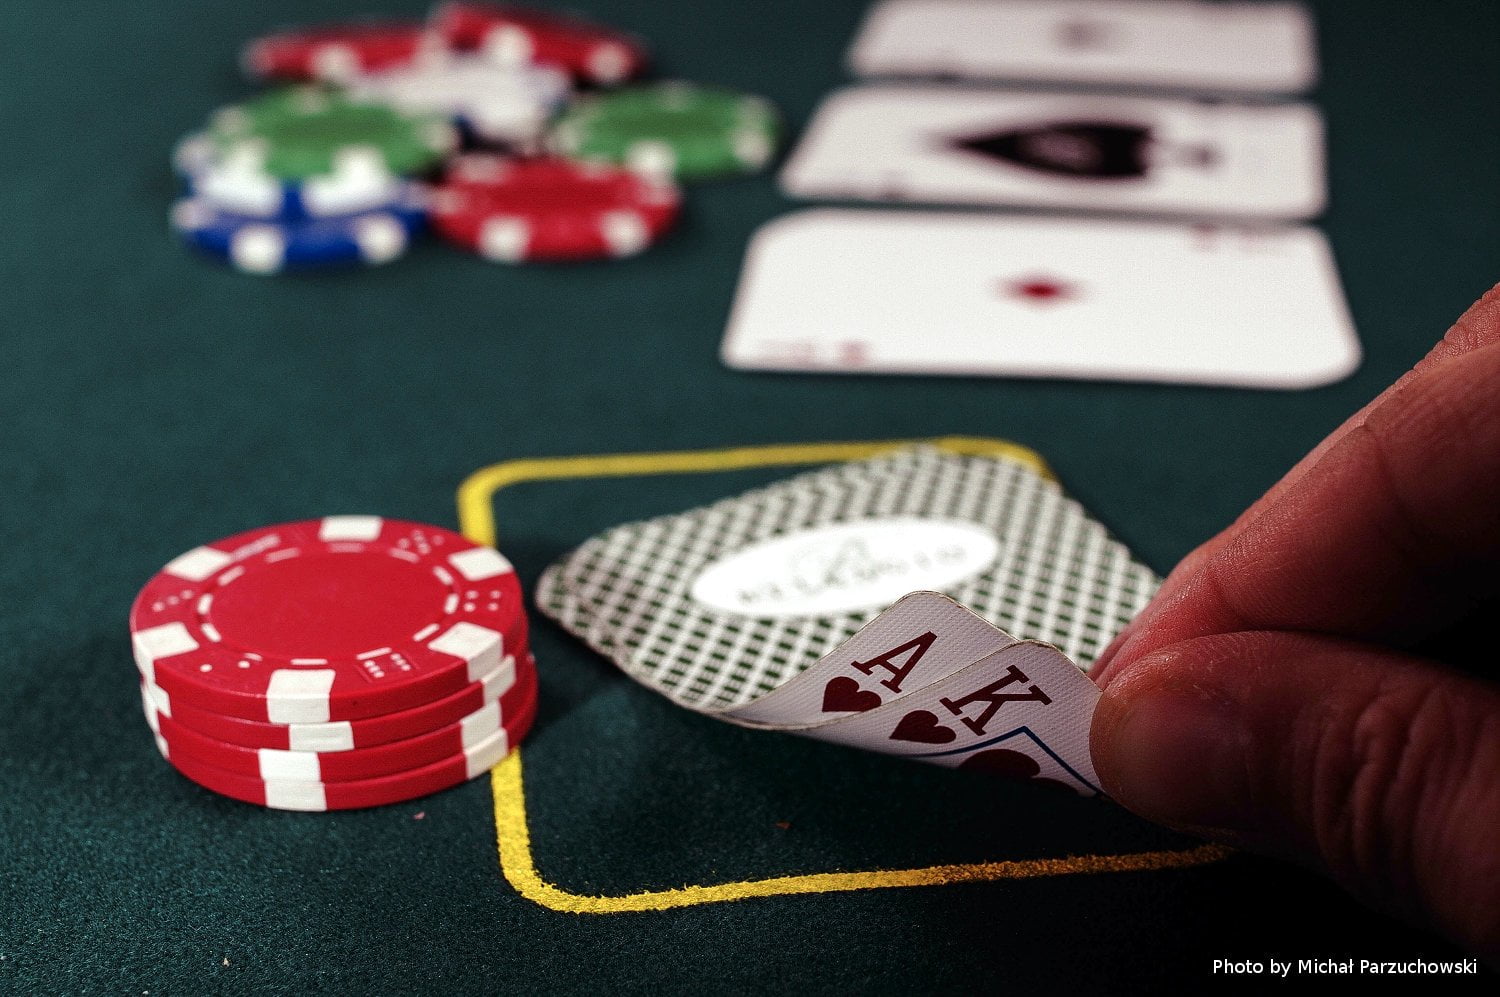 Ukraine plans to legalize gambling in high-end hotels 2